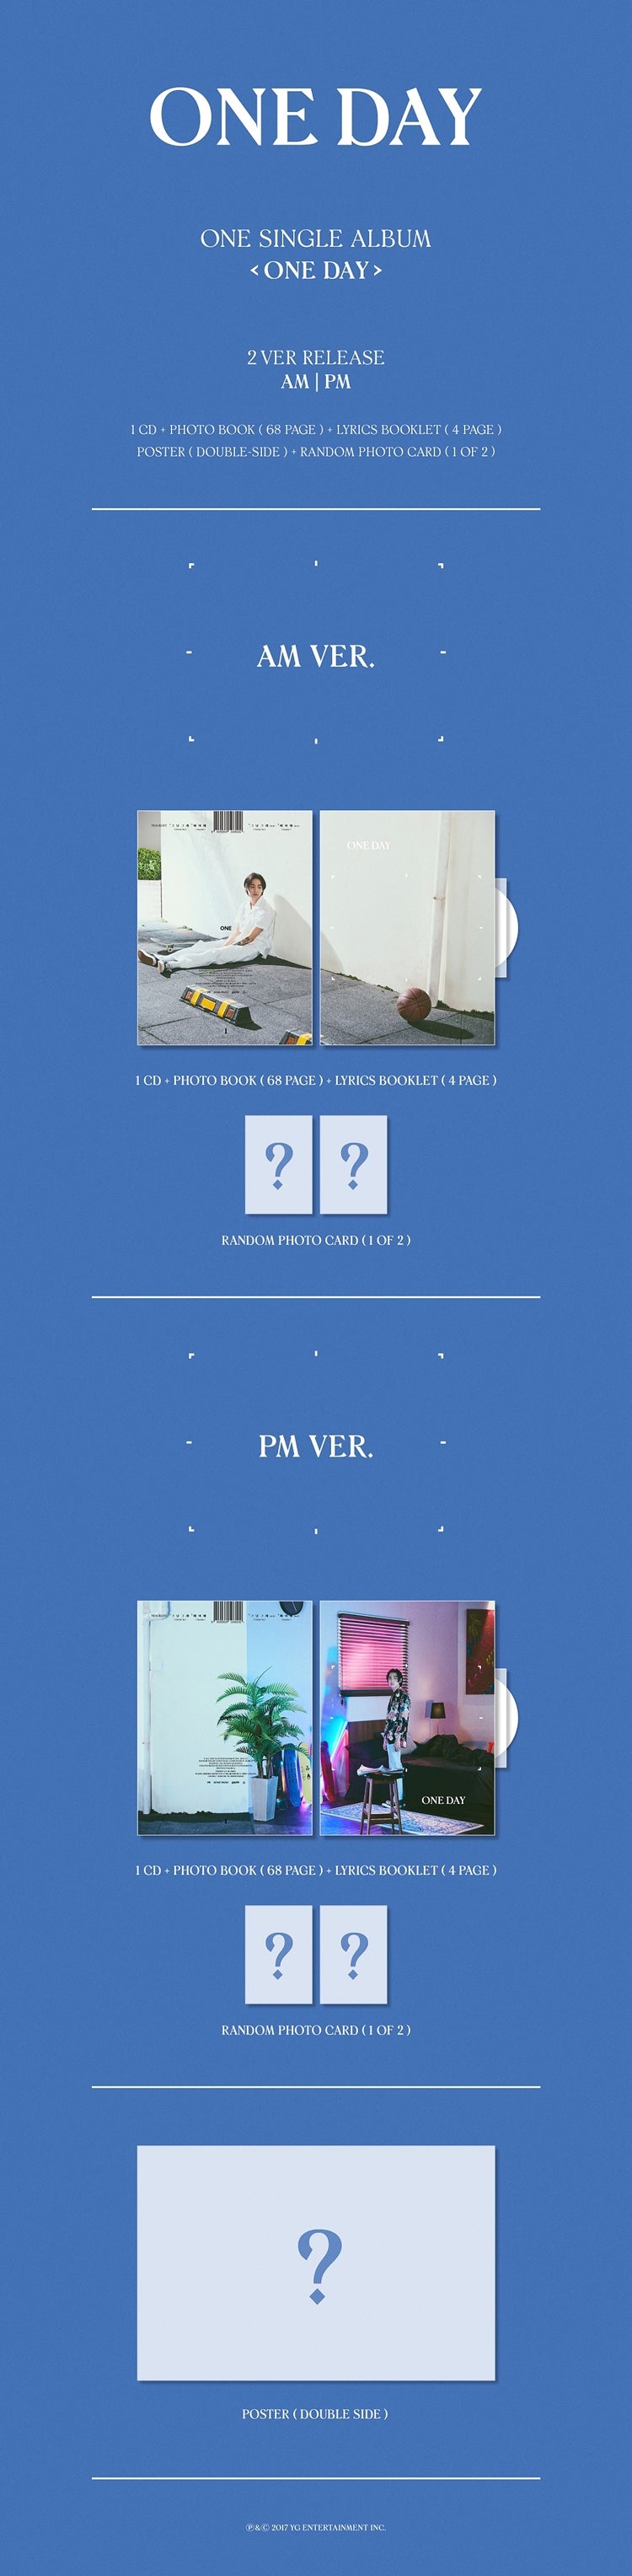 1 CD
1 Photo Book (68 pages)
1 Booklet (4 pages)
1 Random Photo Card